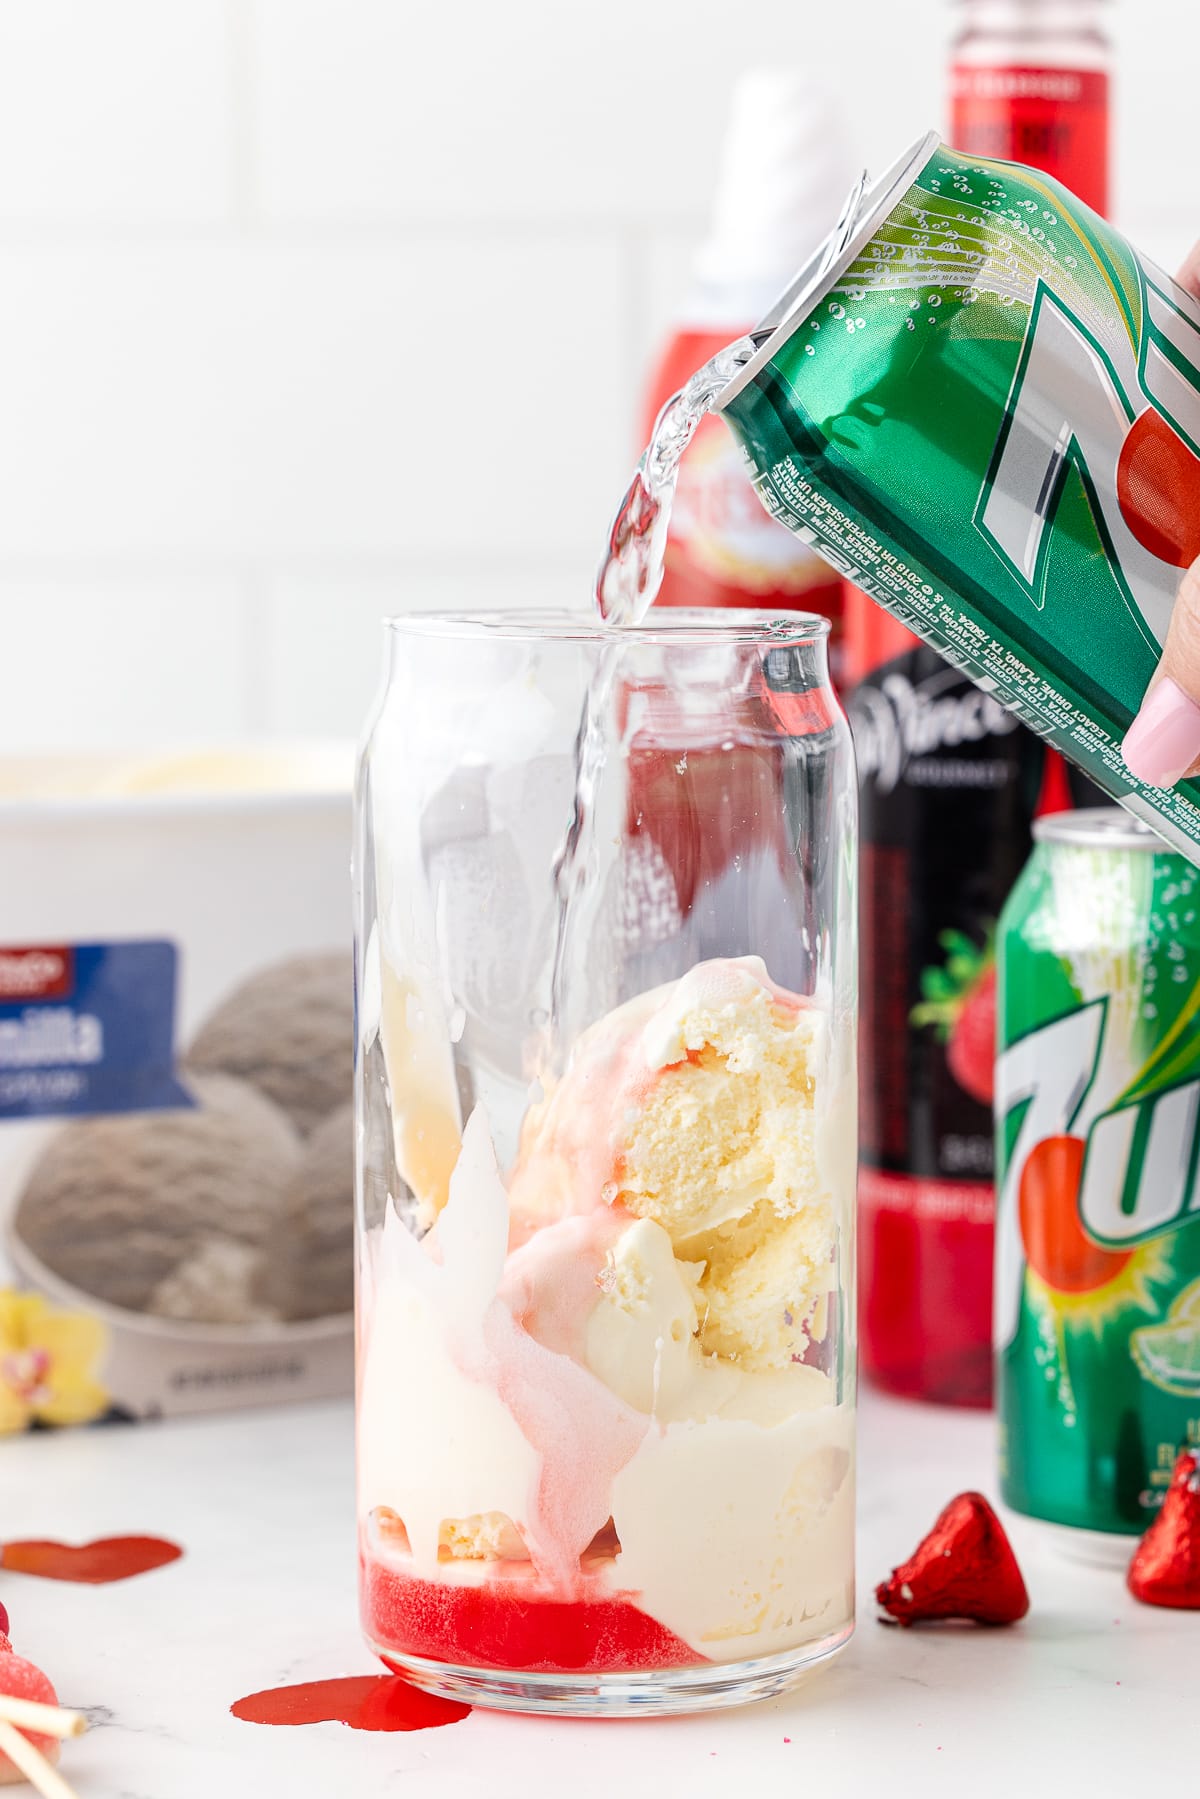 7-up being poured into a glass with ice cream and syrup